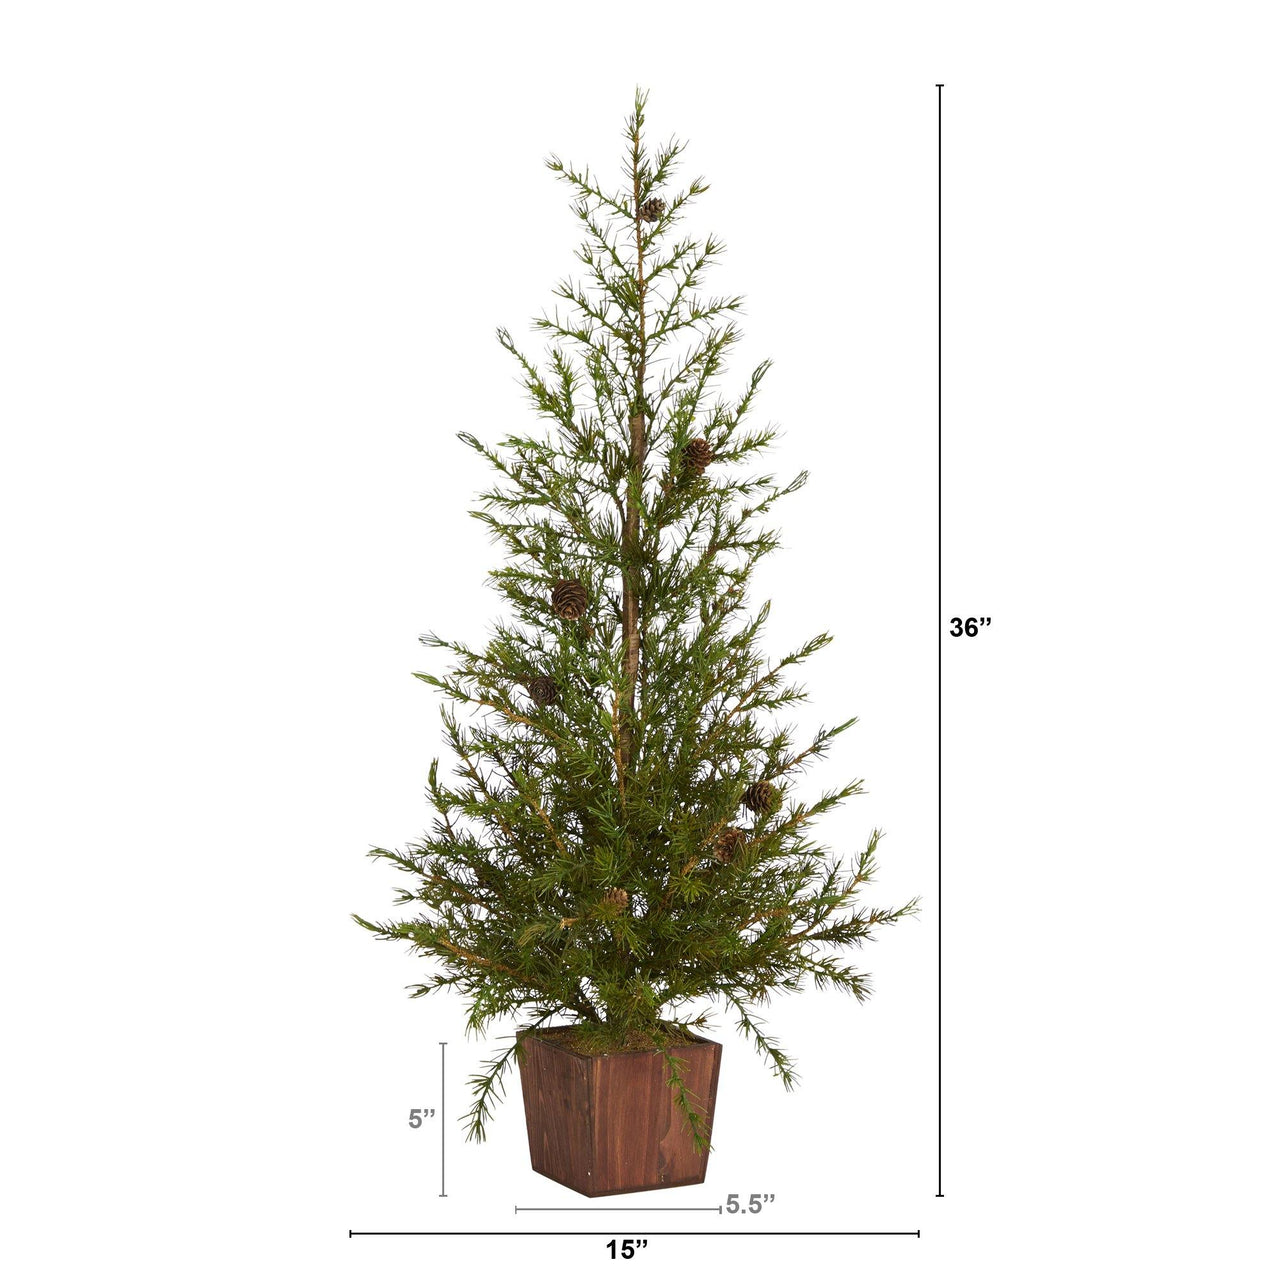 3’ Alpine “Natural Look” Artificial Christmas Tree in Wood Planter with Pine Cones - The Fox Decor